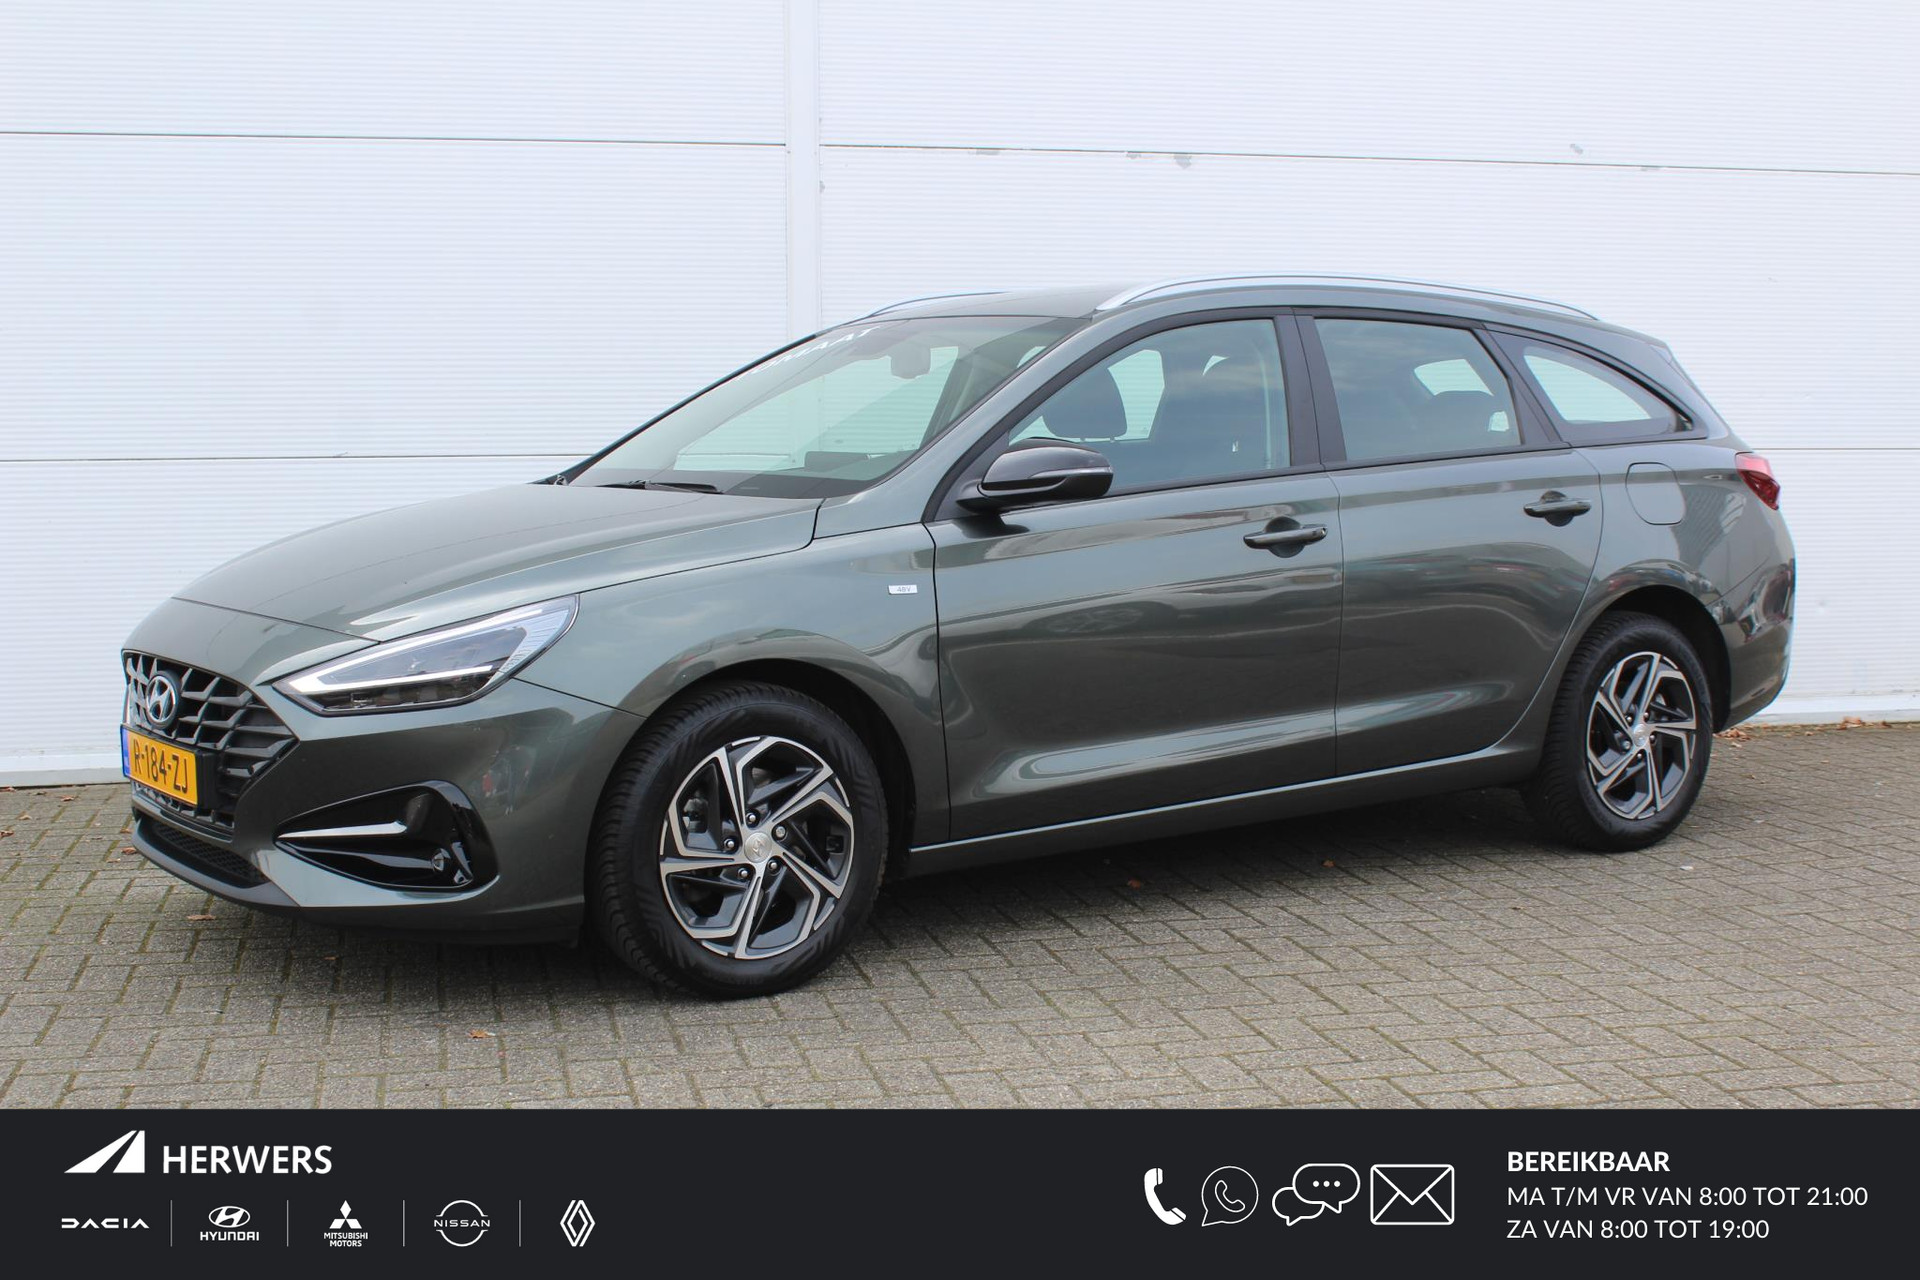 Hyundai i30 Wagon 1.0 T-GDi MHEV Comfort Smart AUTOMAAT / Navigatie + Apple Carplay/Android Auto / Cruise Control / Achteruitrijcamera / Climate Control / Keyless Entry & Start /